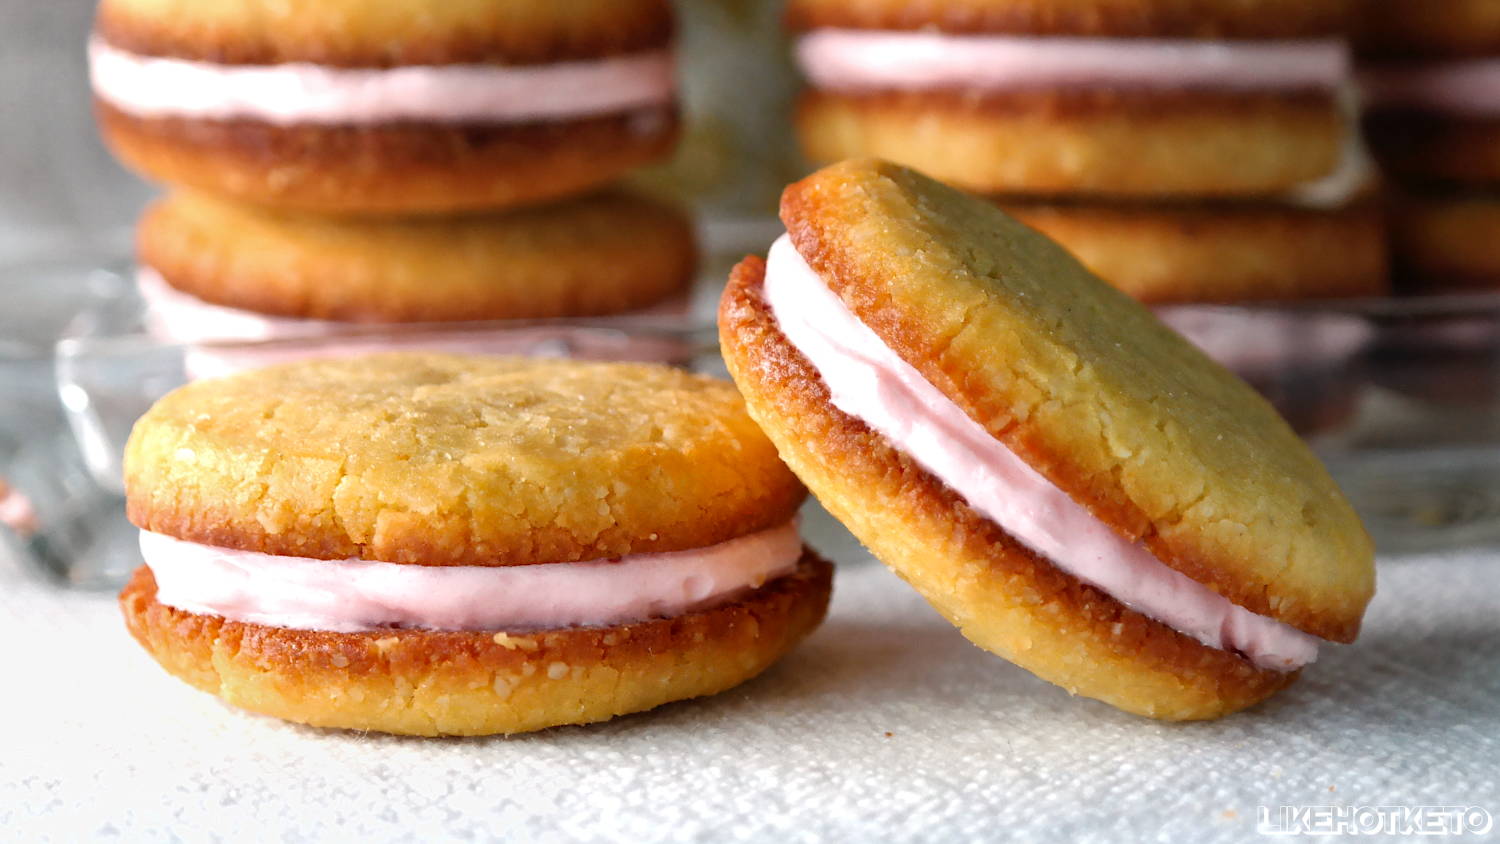 Keto strawberry cream sandwich cookies displayed atop a white cloth.